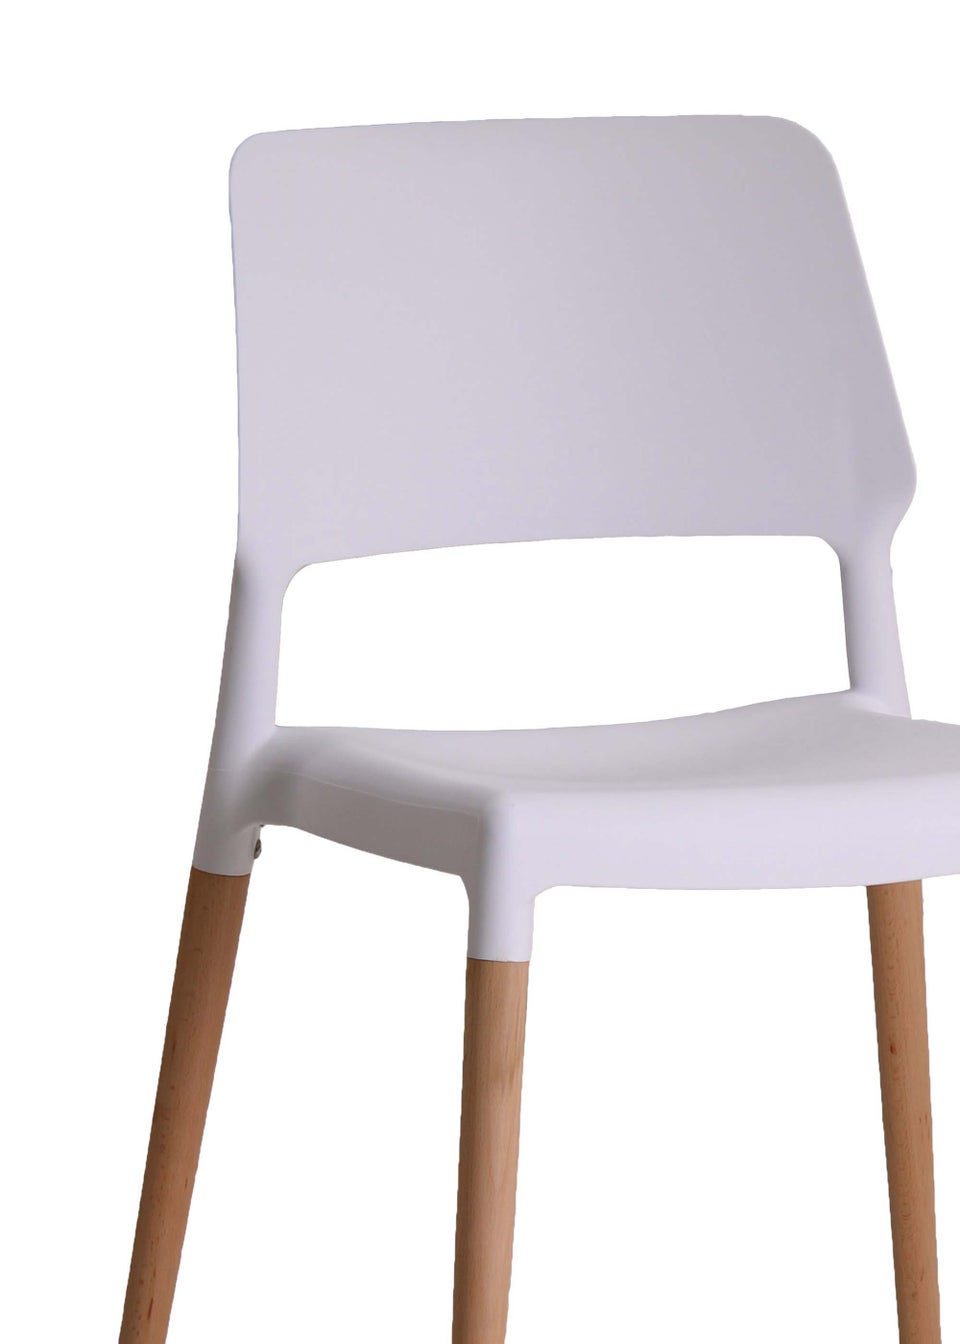 LPD Furniture Set of 2 Riva Chairs White  (810x540x550mm)